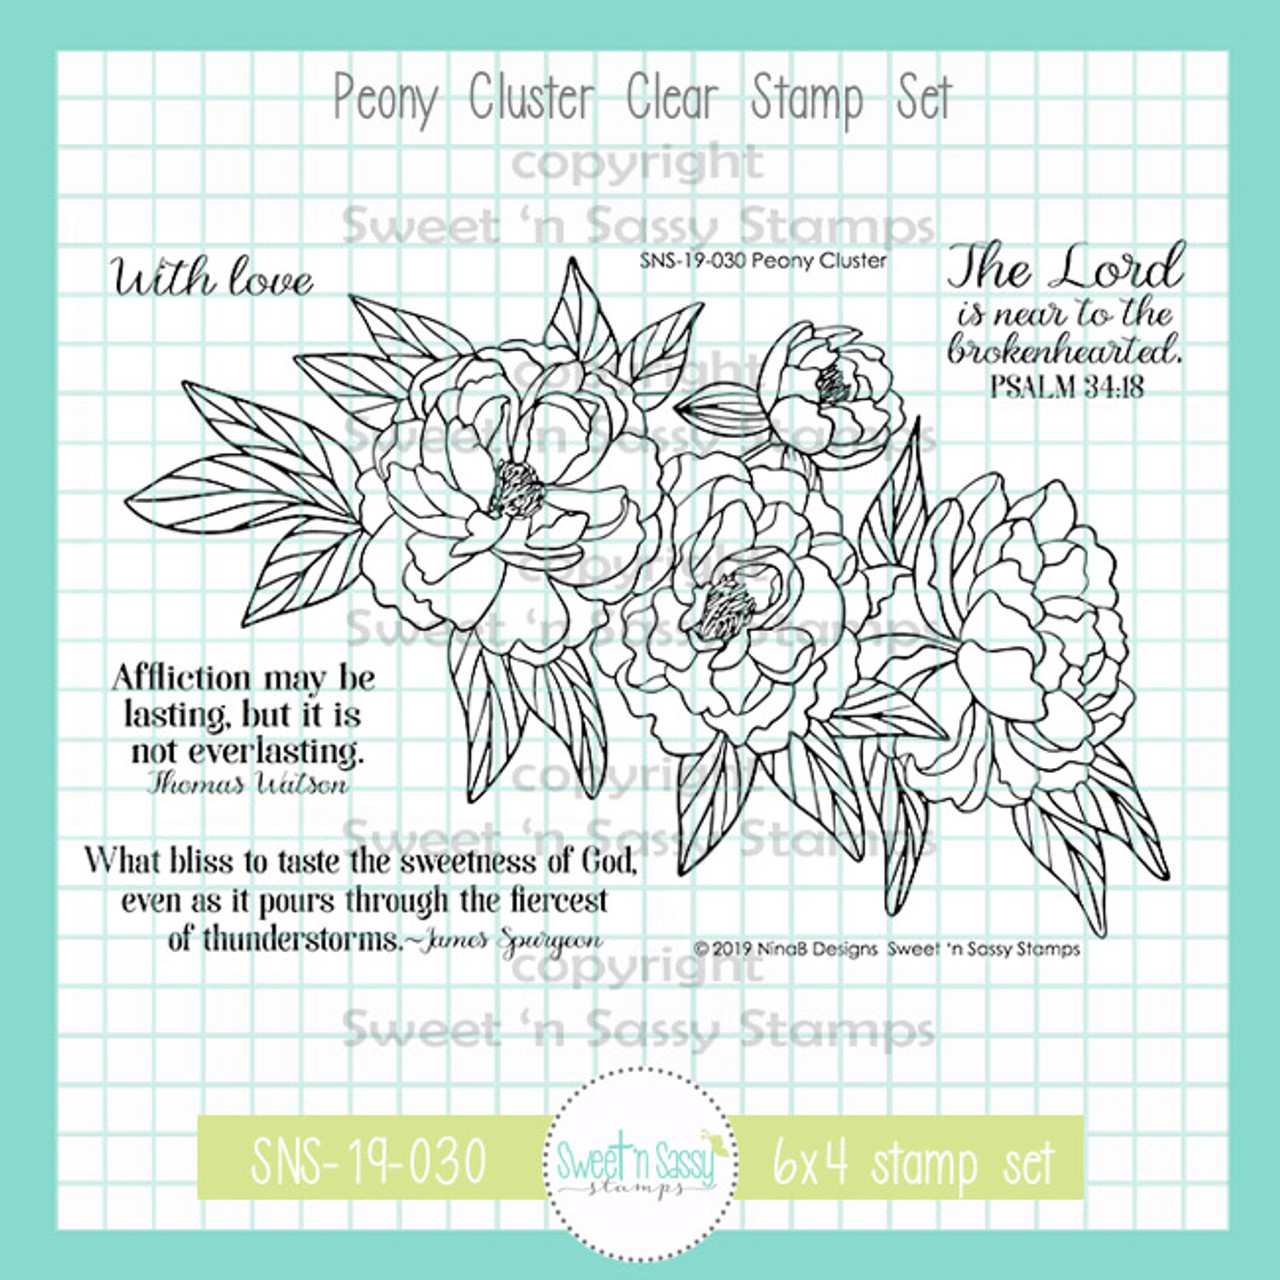 SnSS Peony Cluster Stamp Set